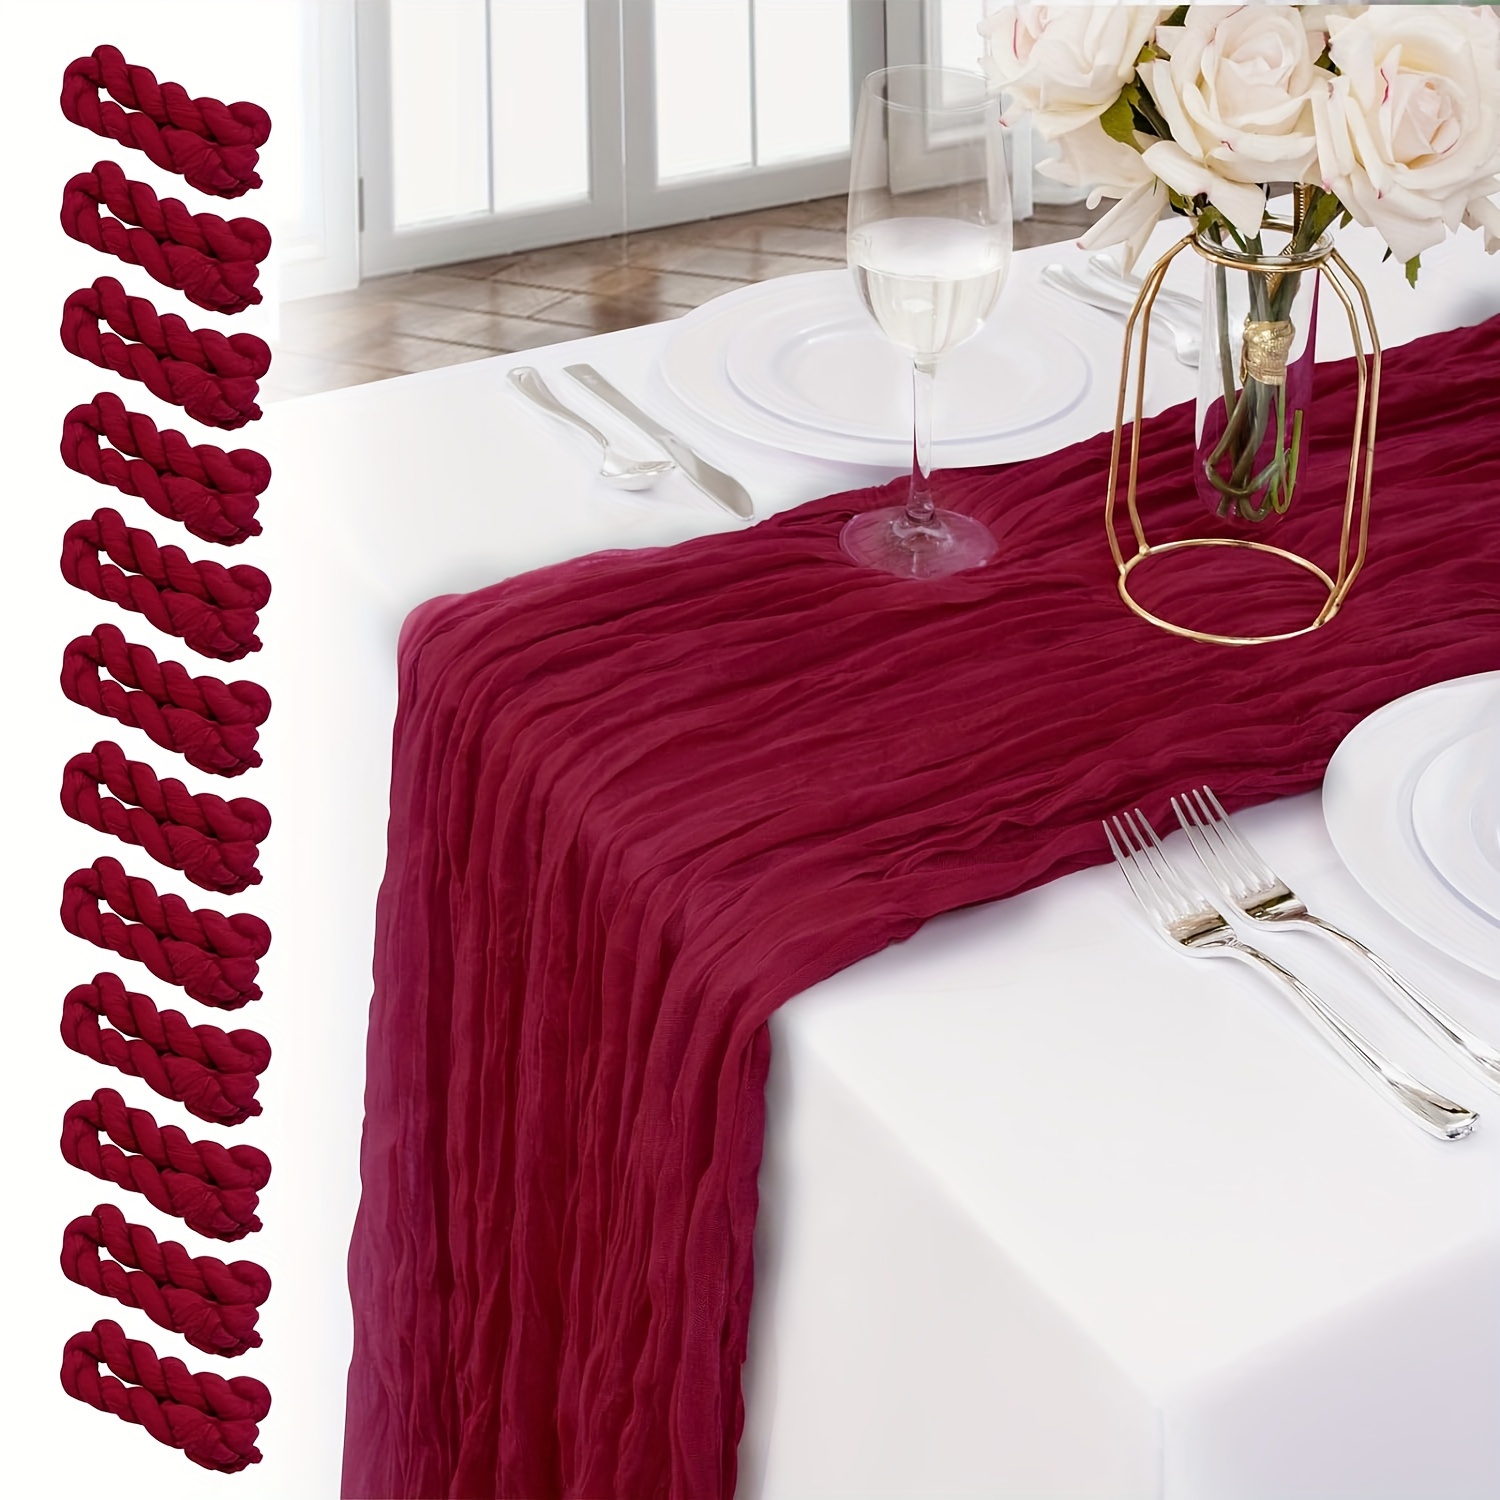 

12 Pack 10ft Burgundy Cheesecloth Table Runner - Table Runner 120 Inches Long Boho Gauze Cheesecloth Table Runner Romantic - 35x120 Inch Table Runner For Wedding, Bridal Shower, Birthday Party